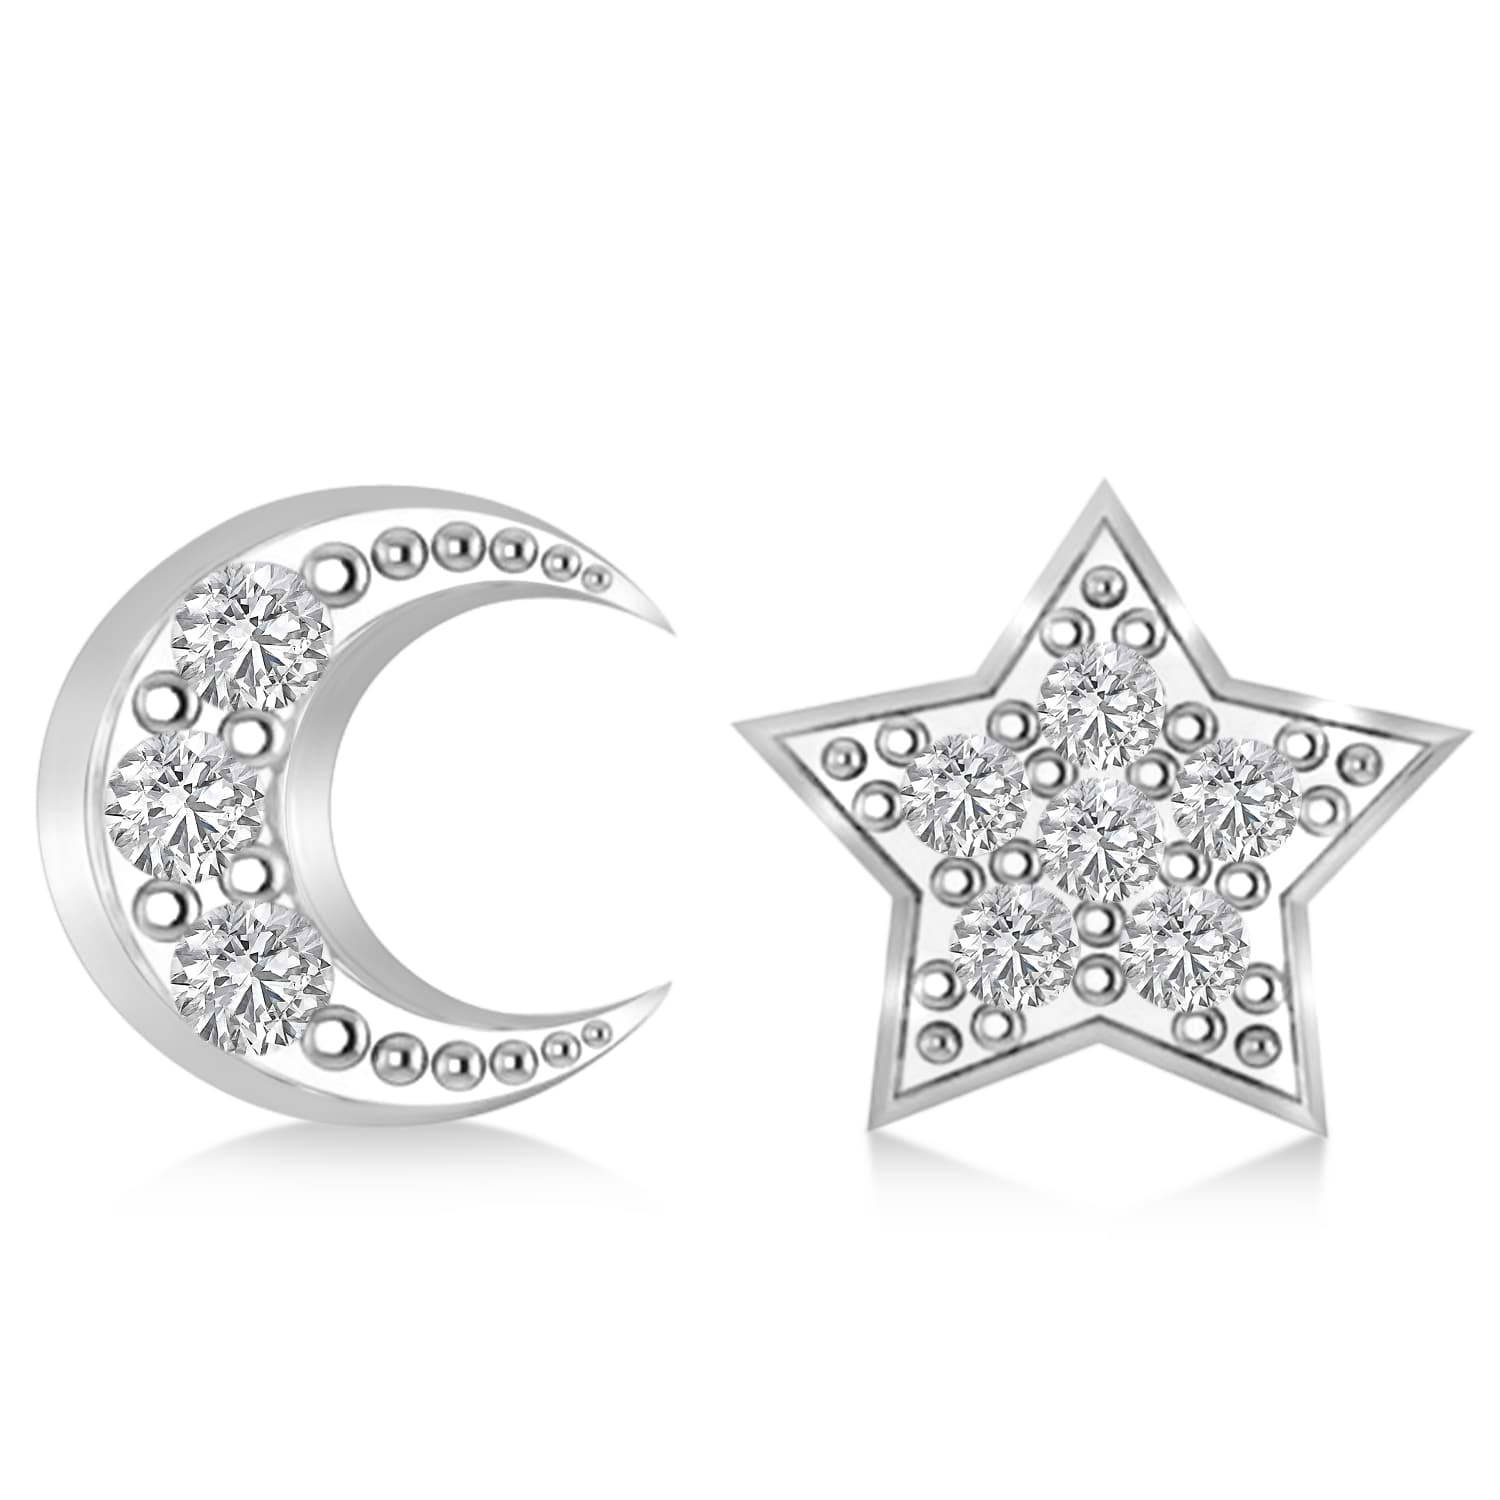 Moon & Star Diamond Mismatched Earrings 14k White Gold (0.14ct)